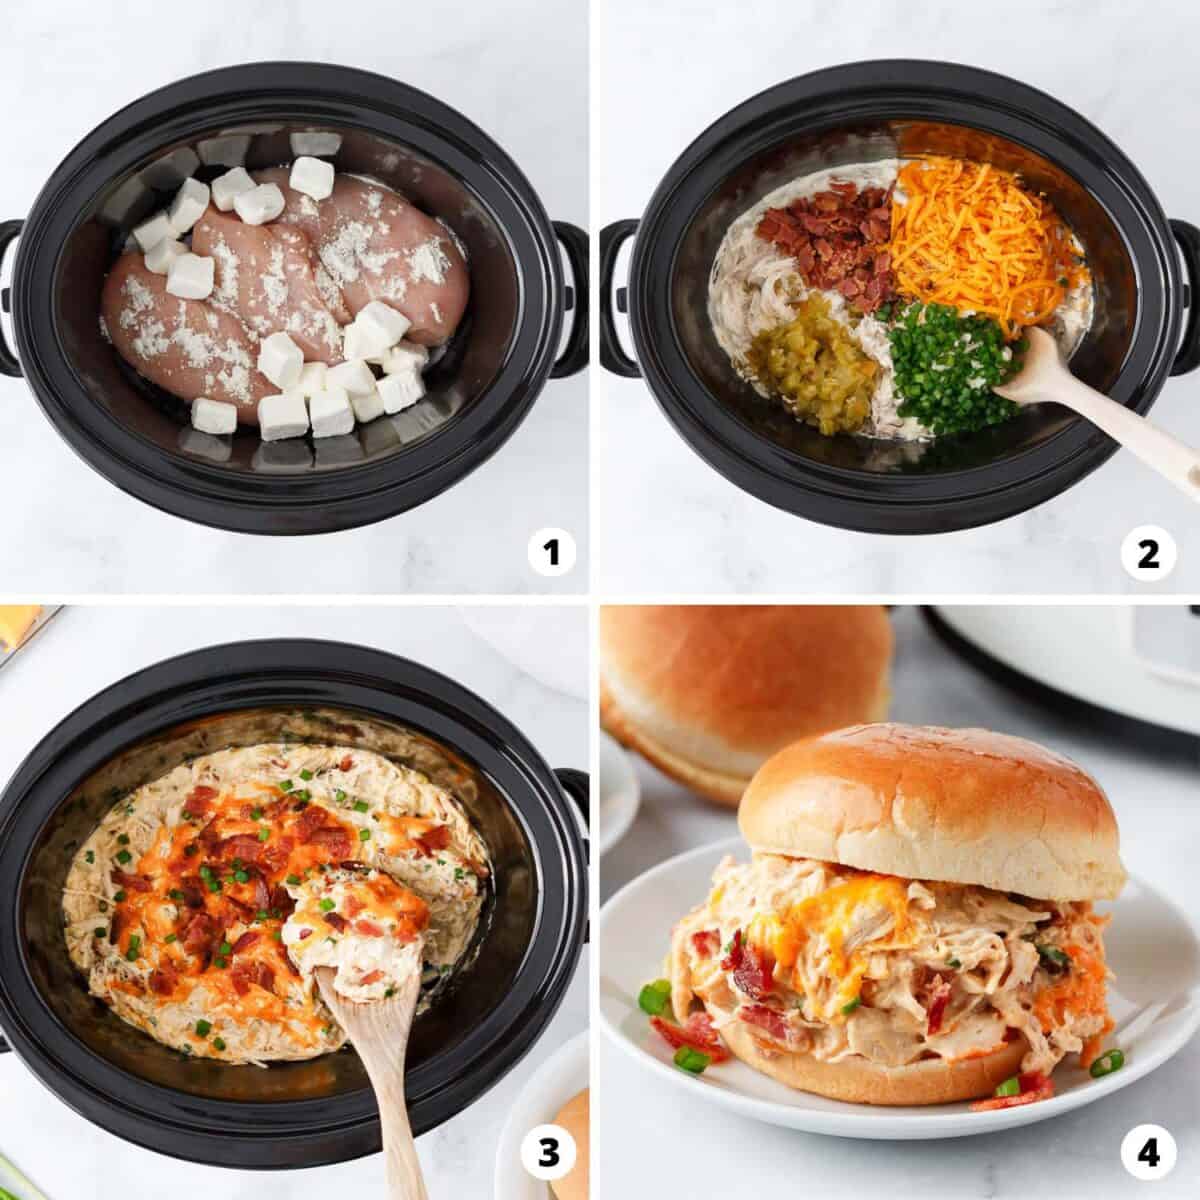 Showing how to make crockpot crack chicken in a 4 step collage.